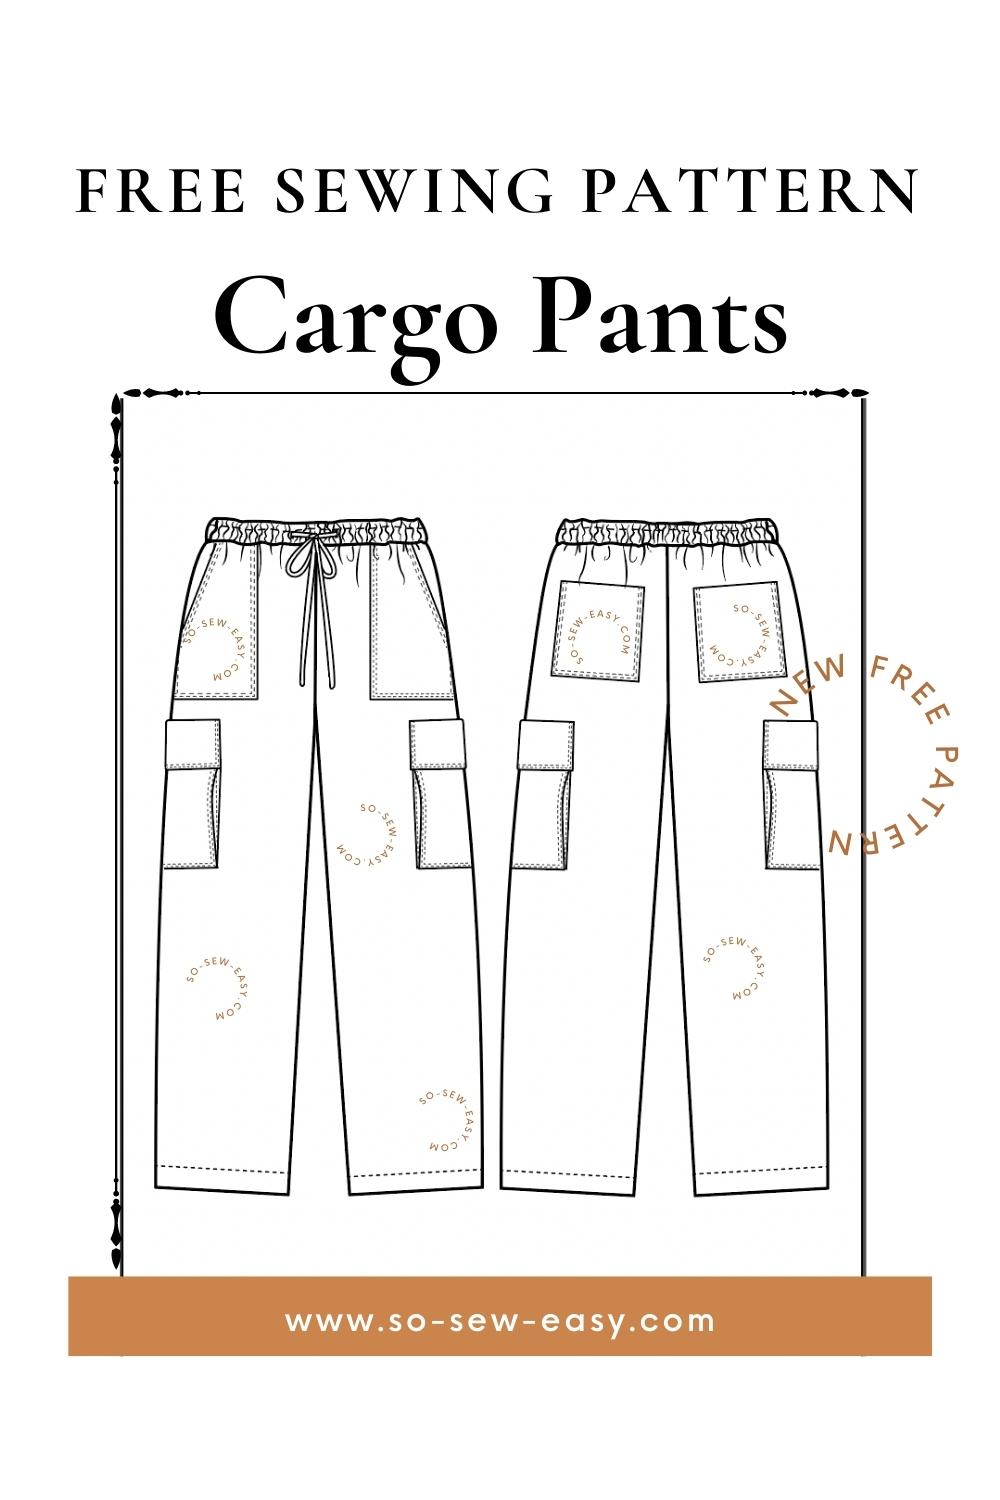 cargo pants outfit video ad mobile size Template